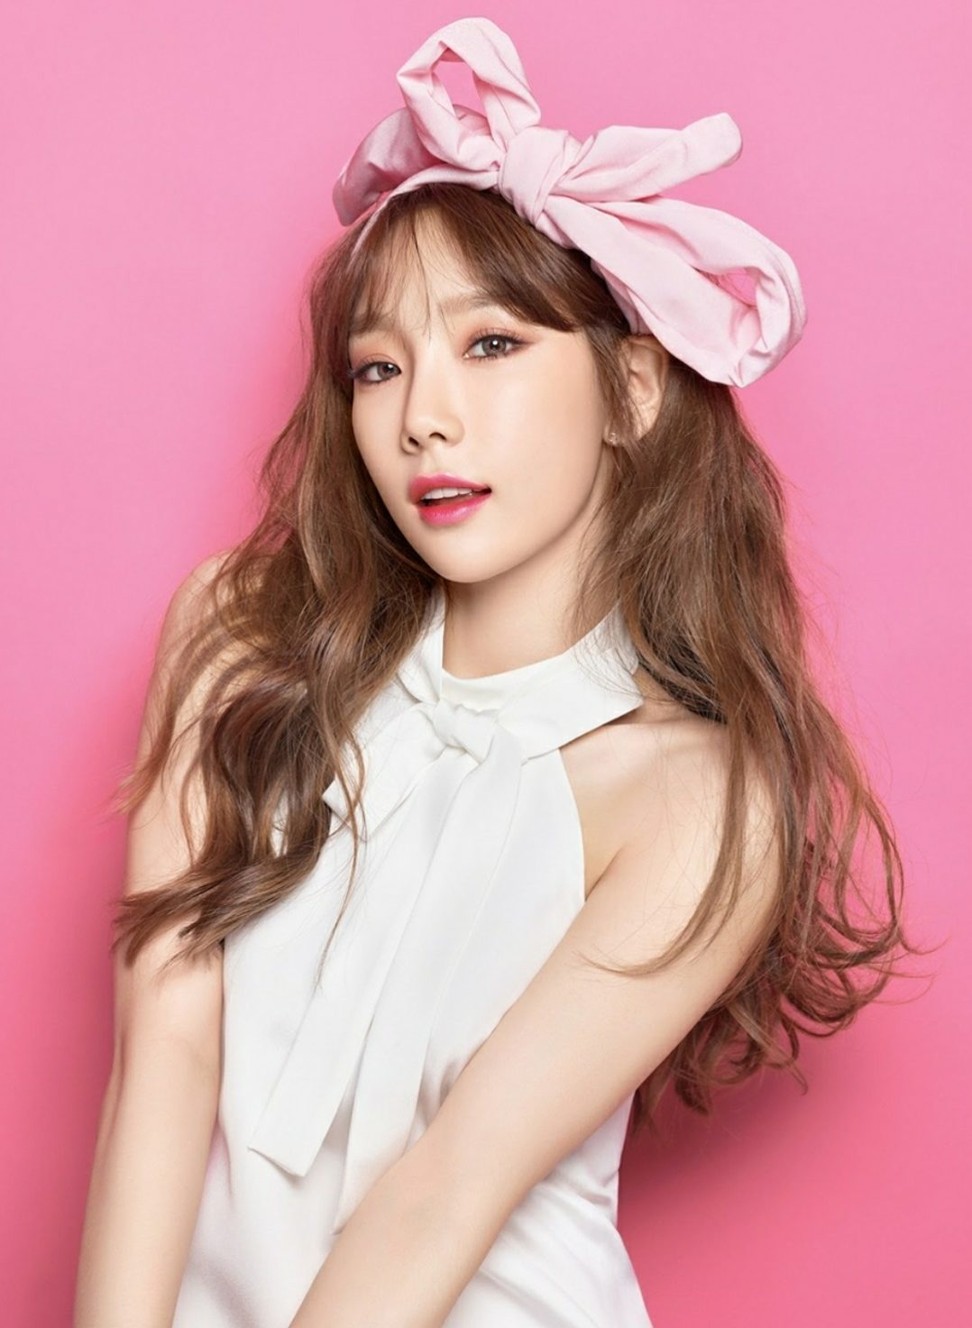 Taeyeon went from Girls’ Generation leader to solo star. Catch her on June 6 at AsiaWorld-Arena.